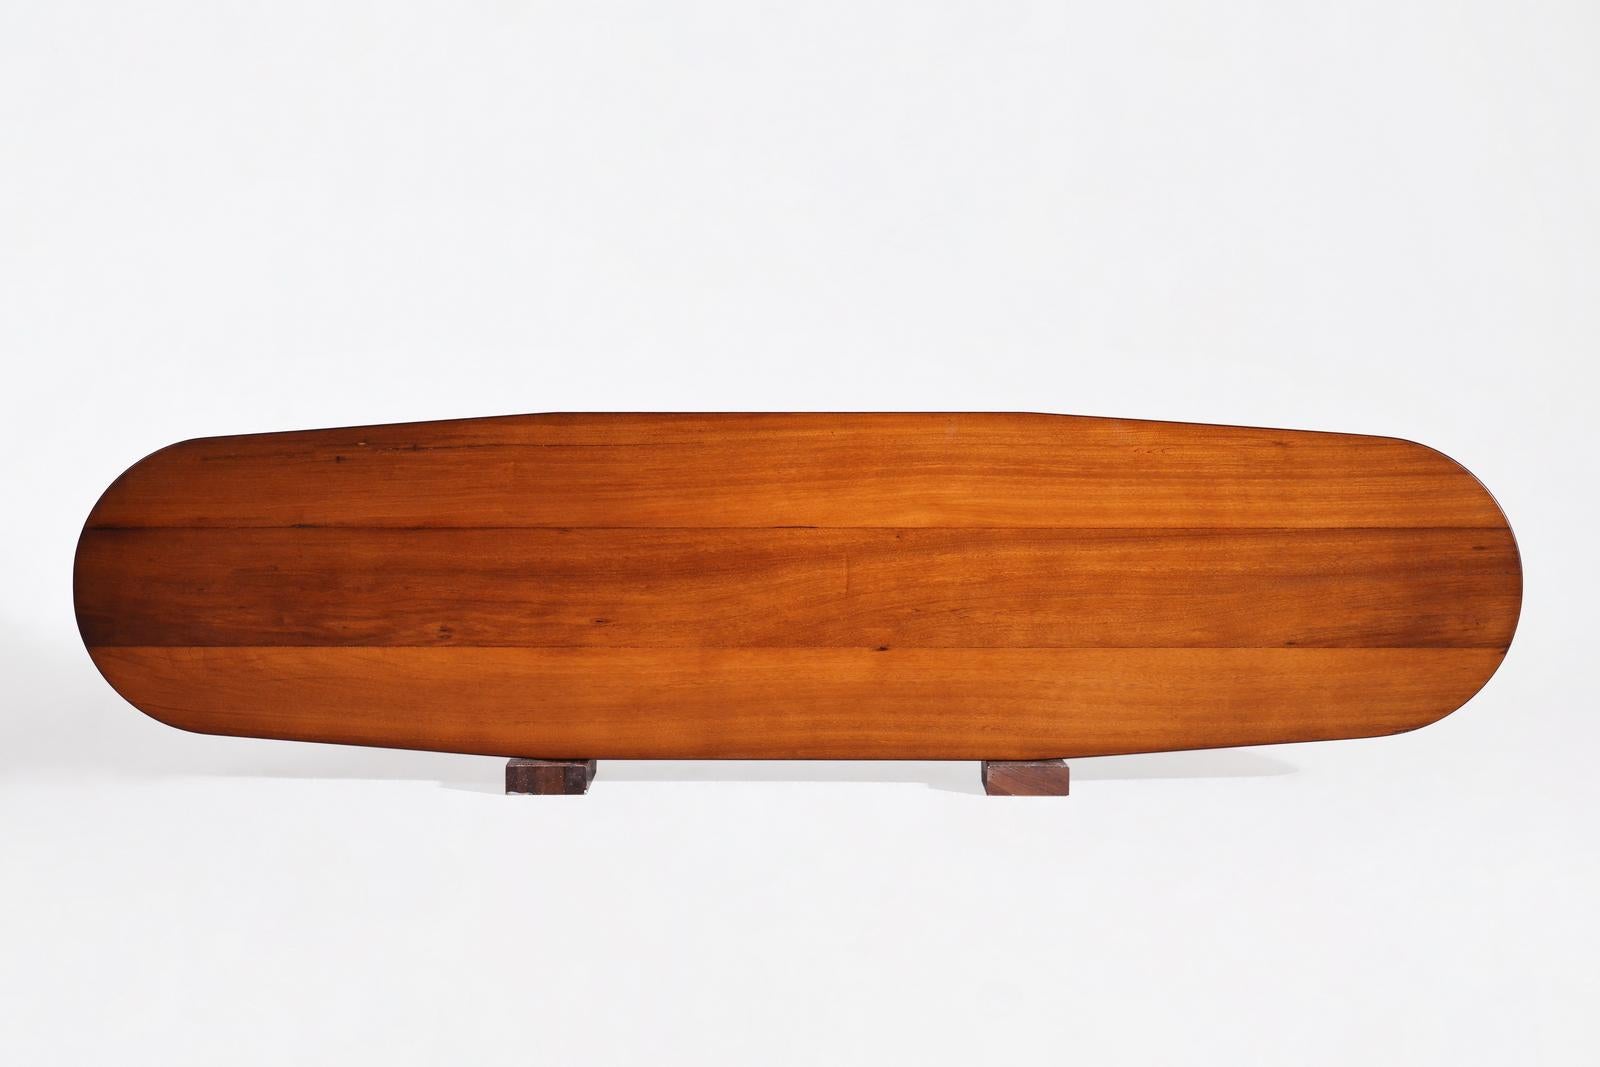 Bespoke Oval Console Reclaimed Hardwood with Aluminum Base, by P. Tendercool For Sale 5